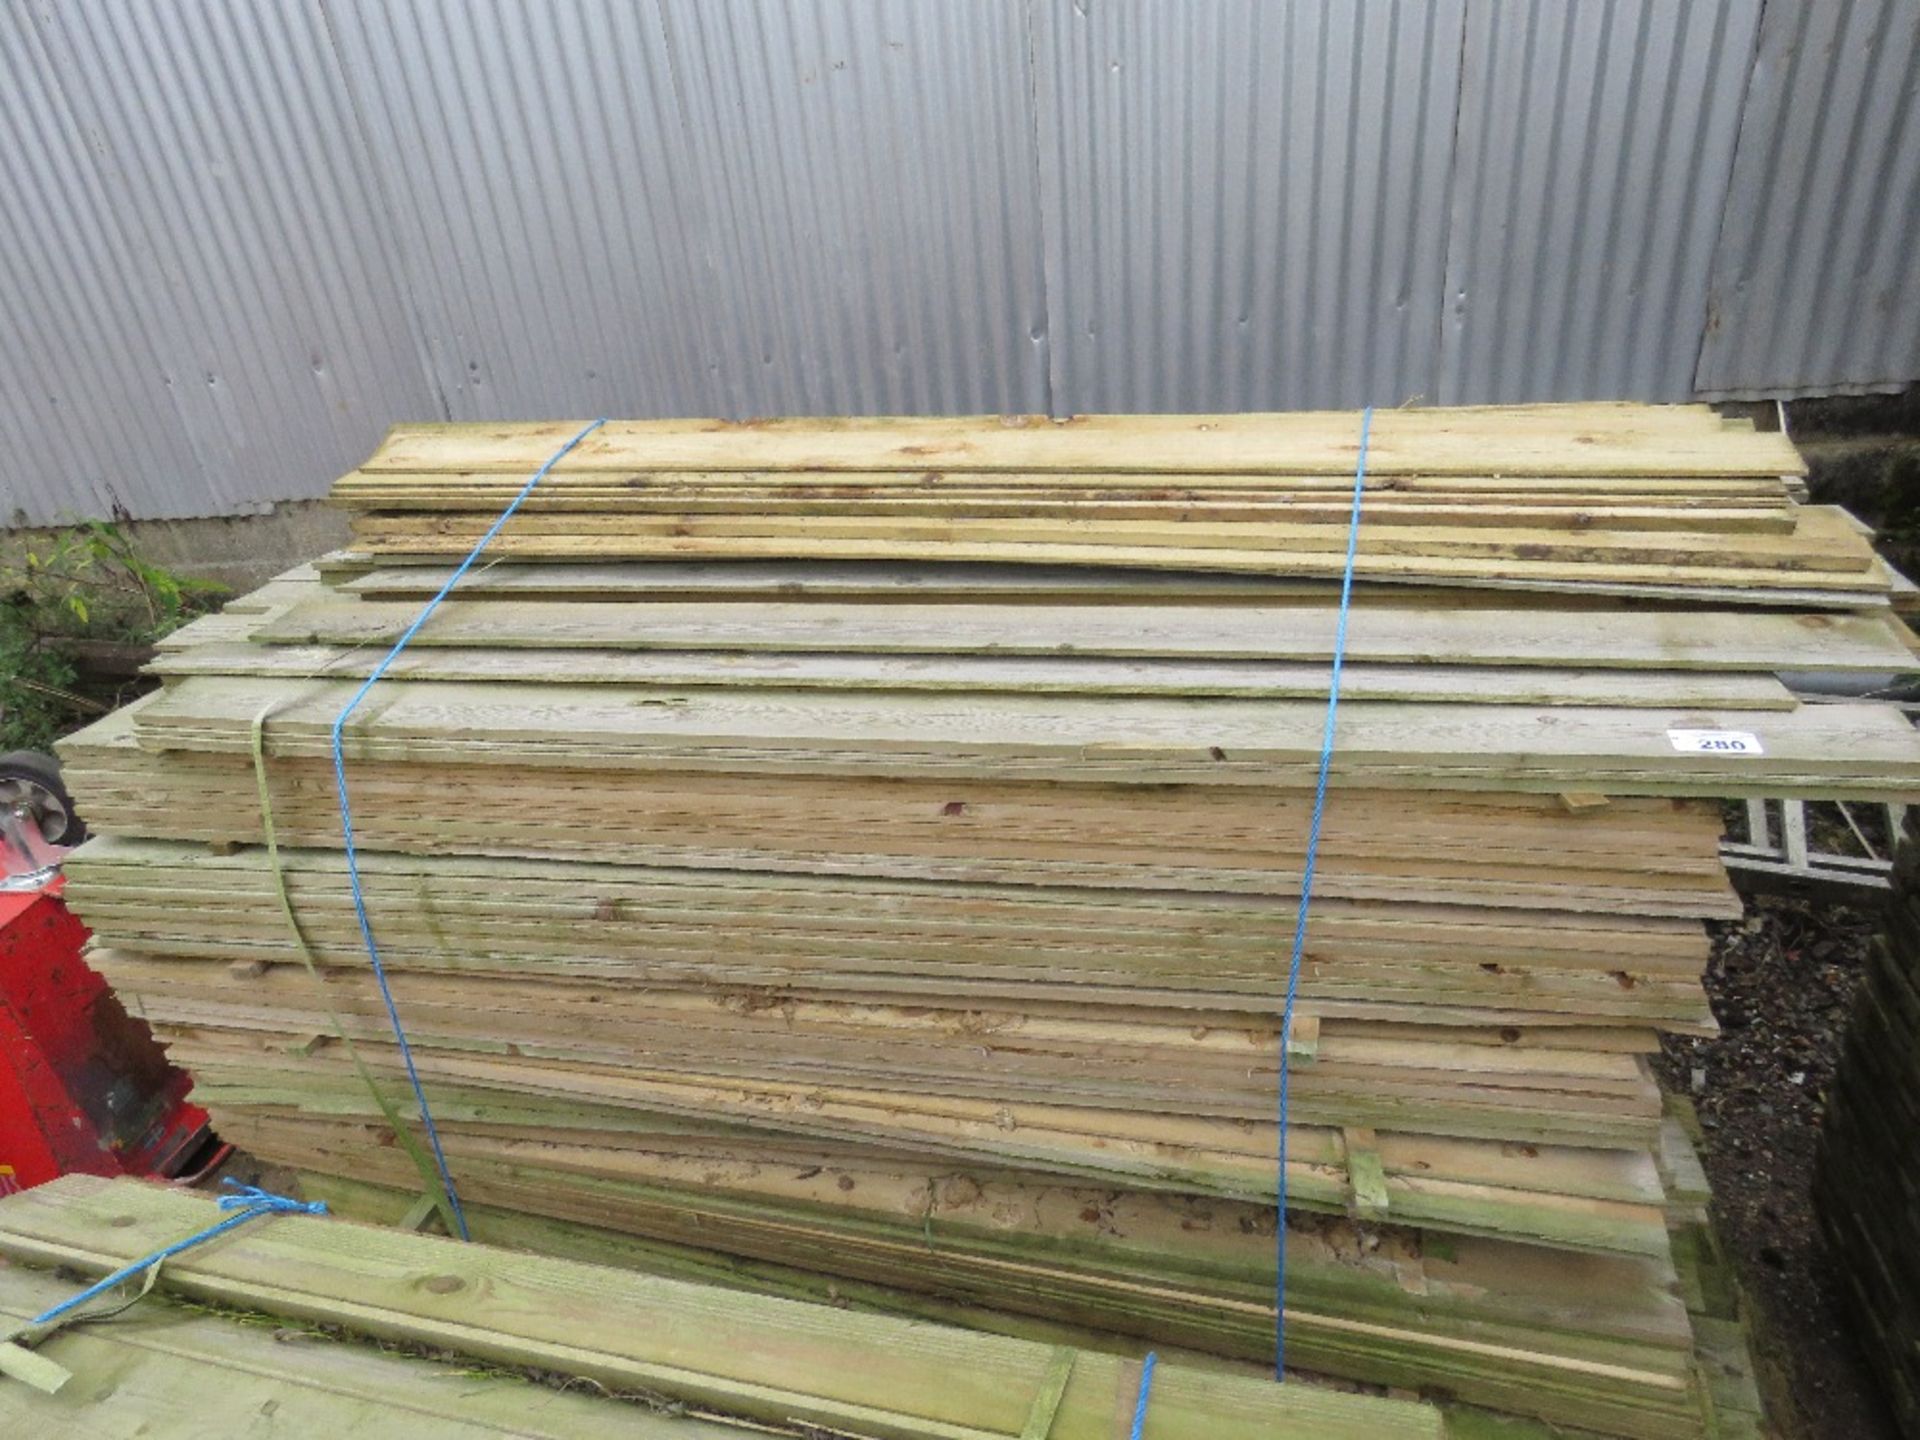 LARGE PACK OF TREATED FEATHER EDGE TIMBER CLADDING BOARDS, 1.79M LENGTH X 10CM WIDTH APPROX. - Image 3 of 5